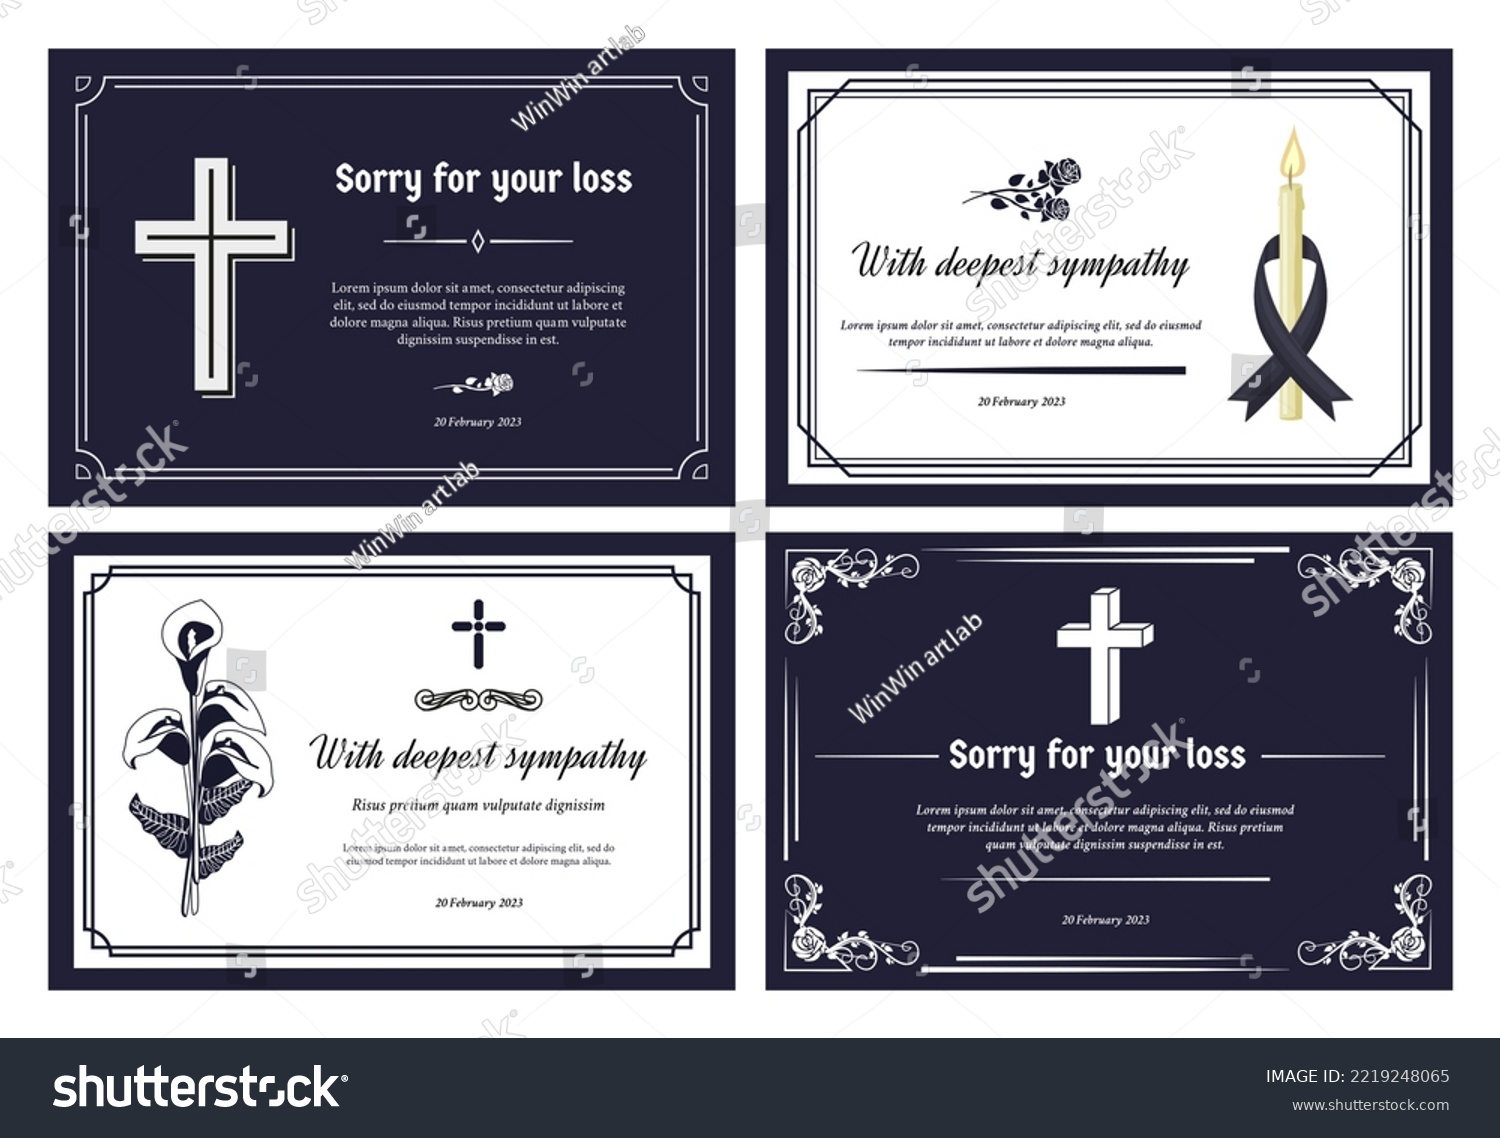 SVG of Funeral card layout. Condolence banner with deepest sympathy and sorry for your loss. Frame borders decorative template vector set of funeral grief and remembrance illustration svg